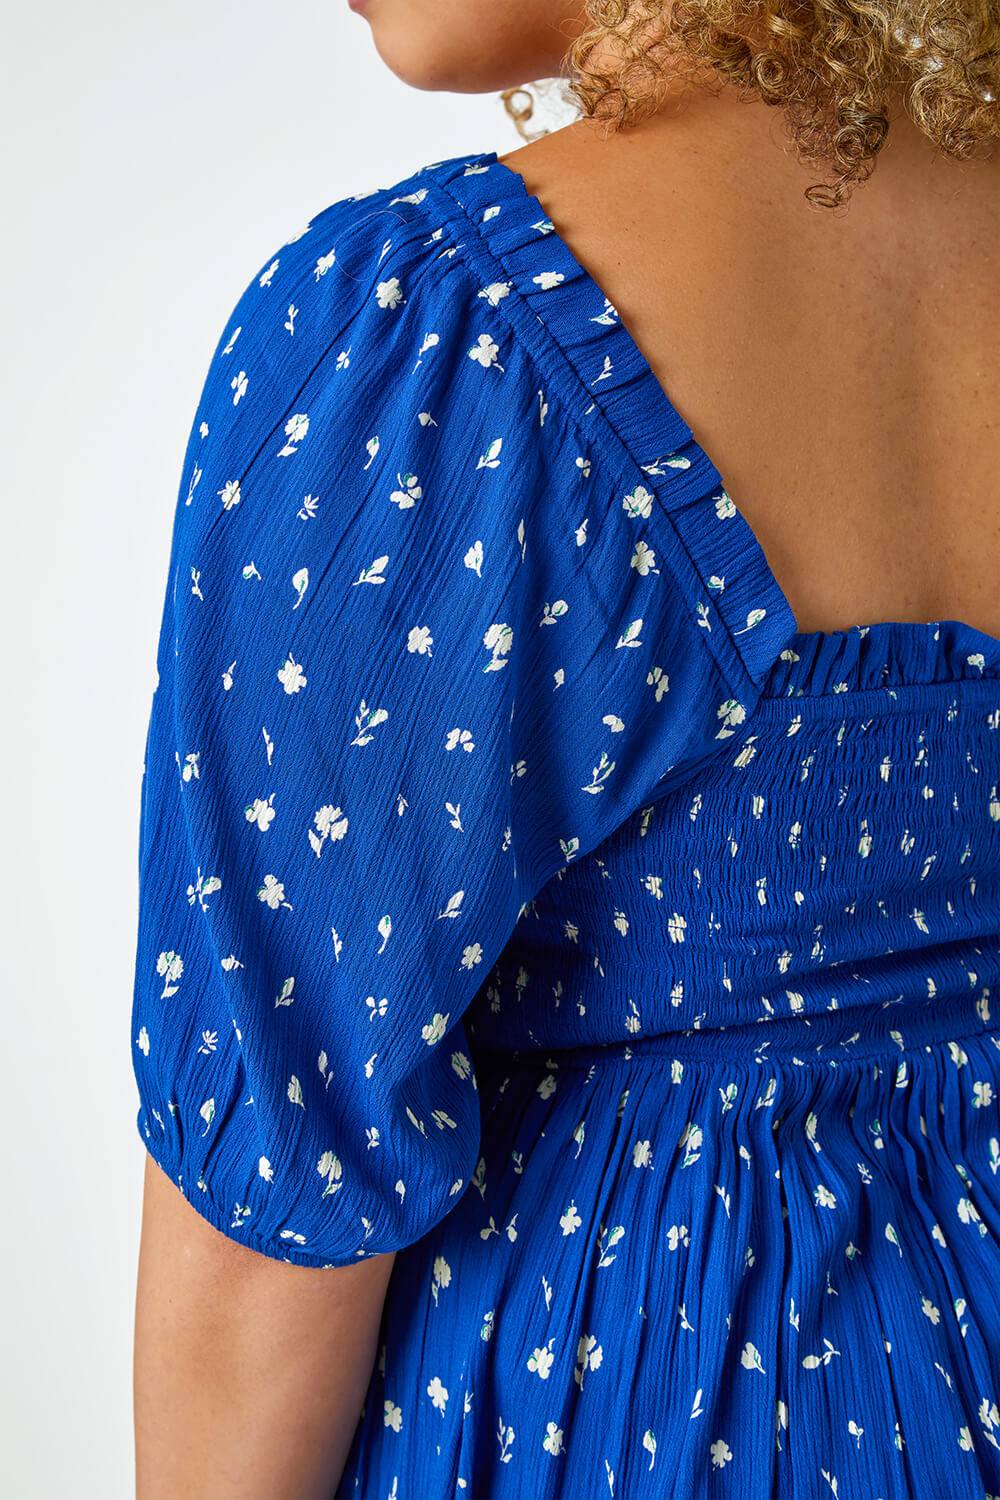 Blue Curve Ditsy Floral Shirred Stretch Top, Image 5 of 5